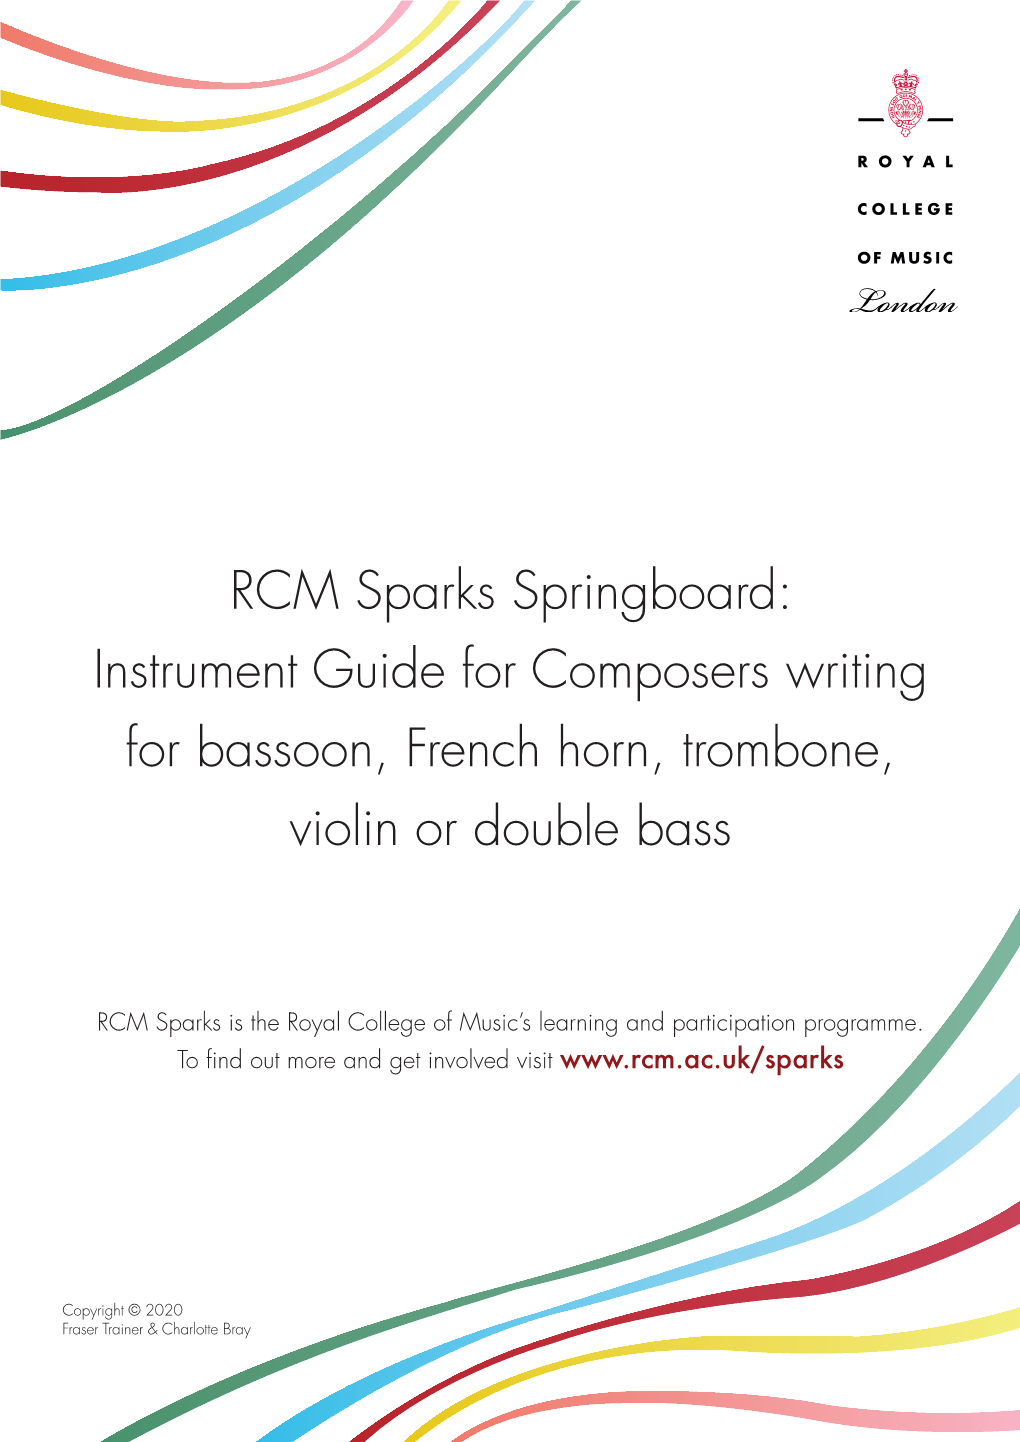 RCM Sparks Springboard: Instrument Guide for Composers Writing for Bassoon, French Horn, Trombone, Violin Or Double Bass